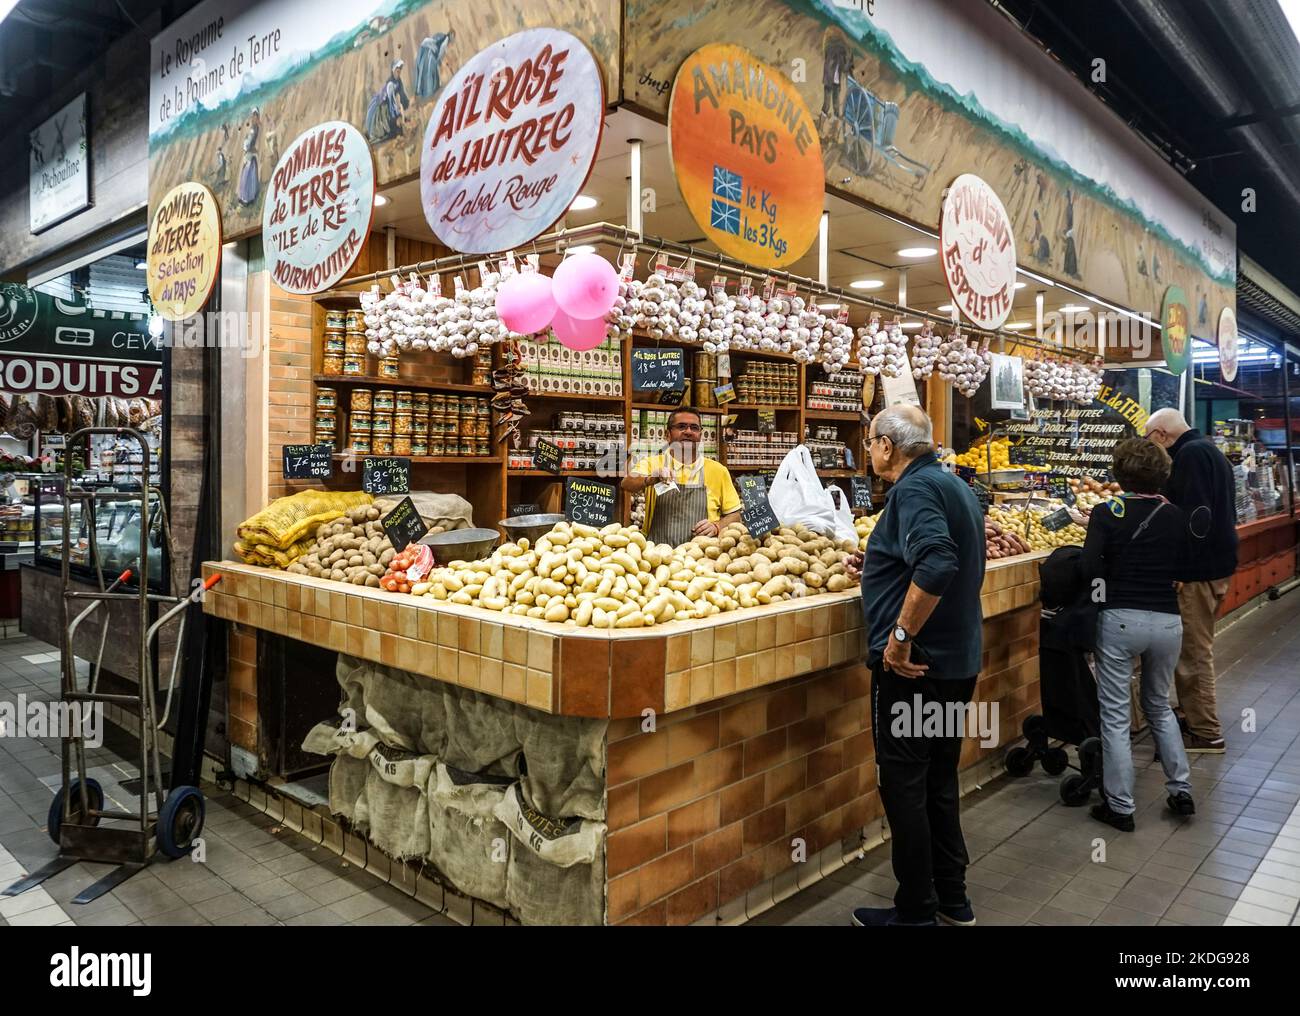 A market stall specialising in a variety of potatoes in Les Halles. De Nímes, Nimes, France, A large indoor market with over 100 stalls. Stock Photo